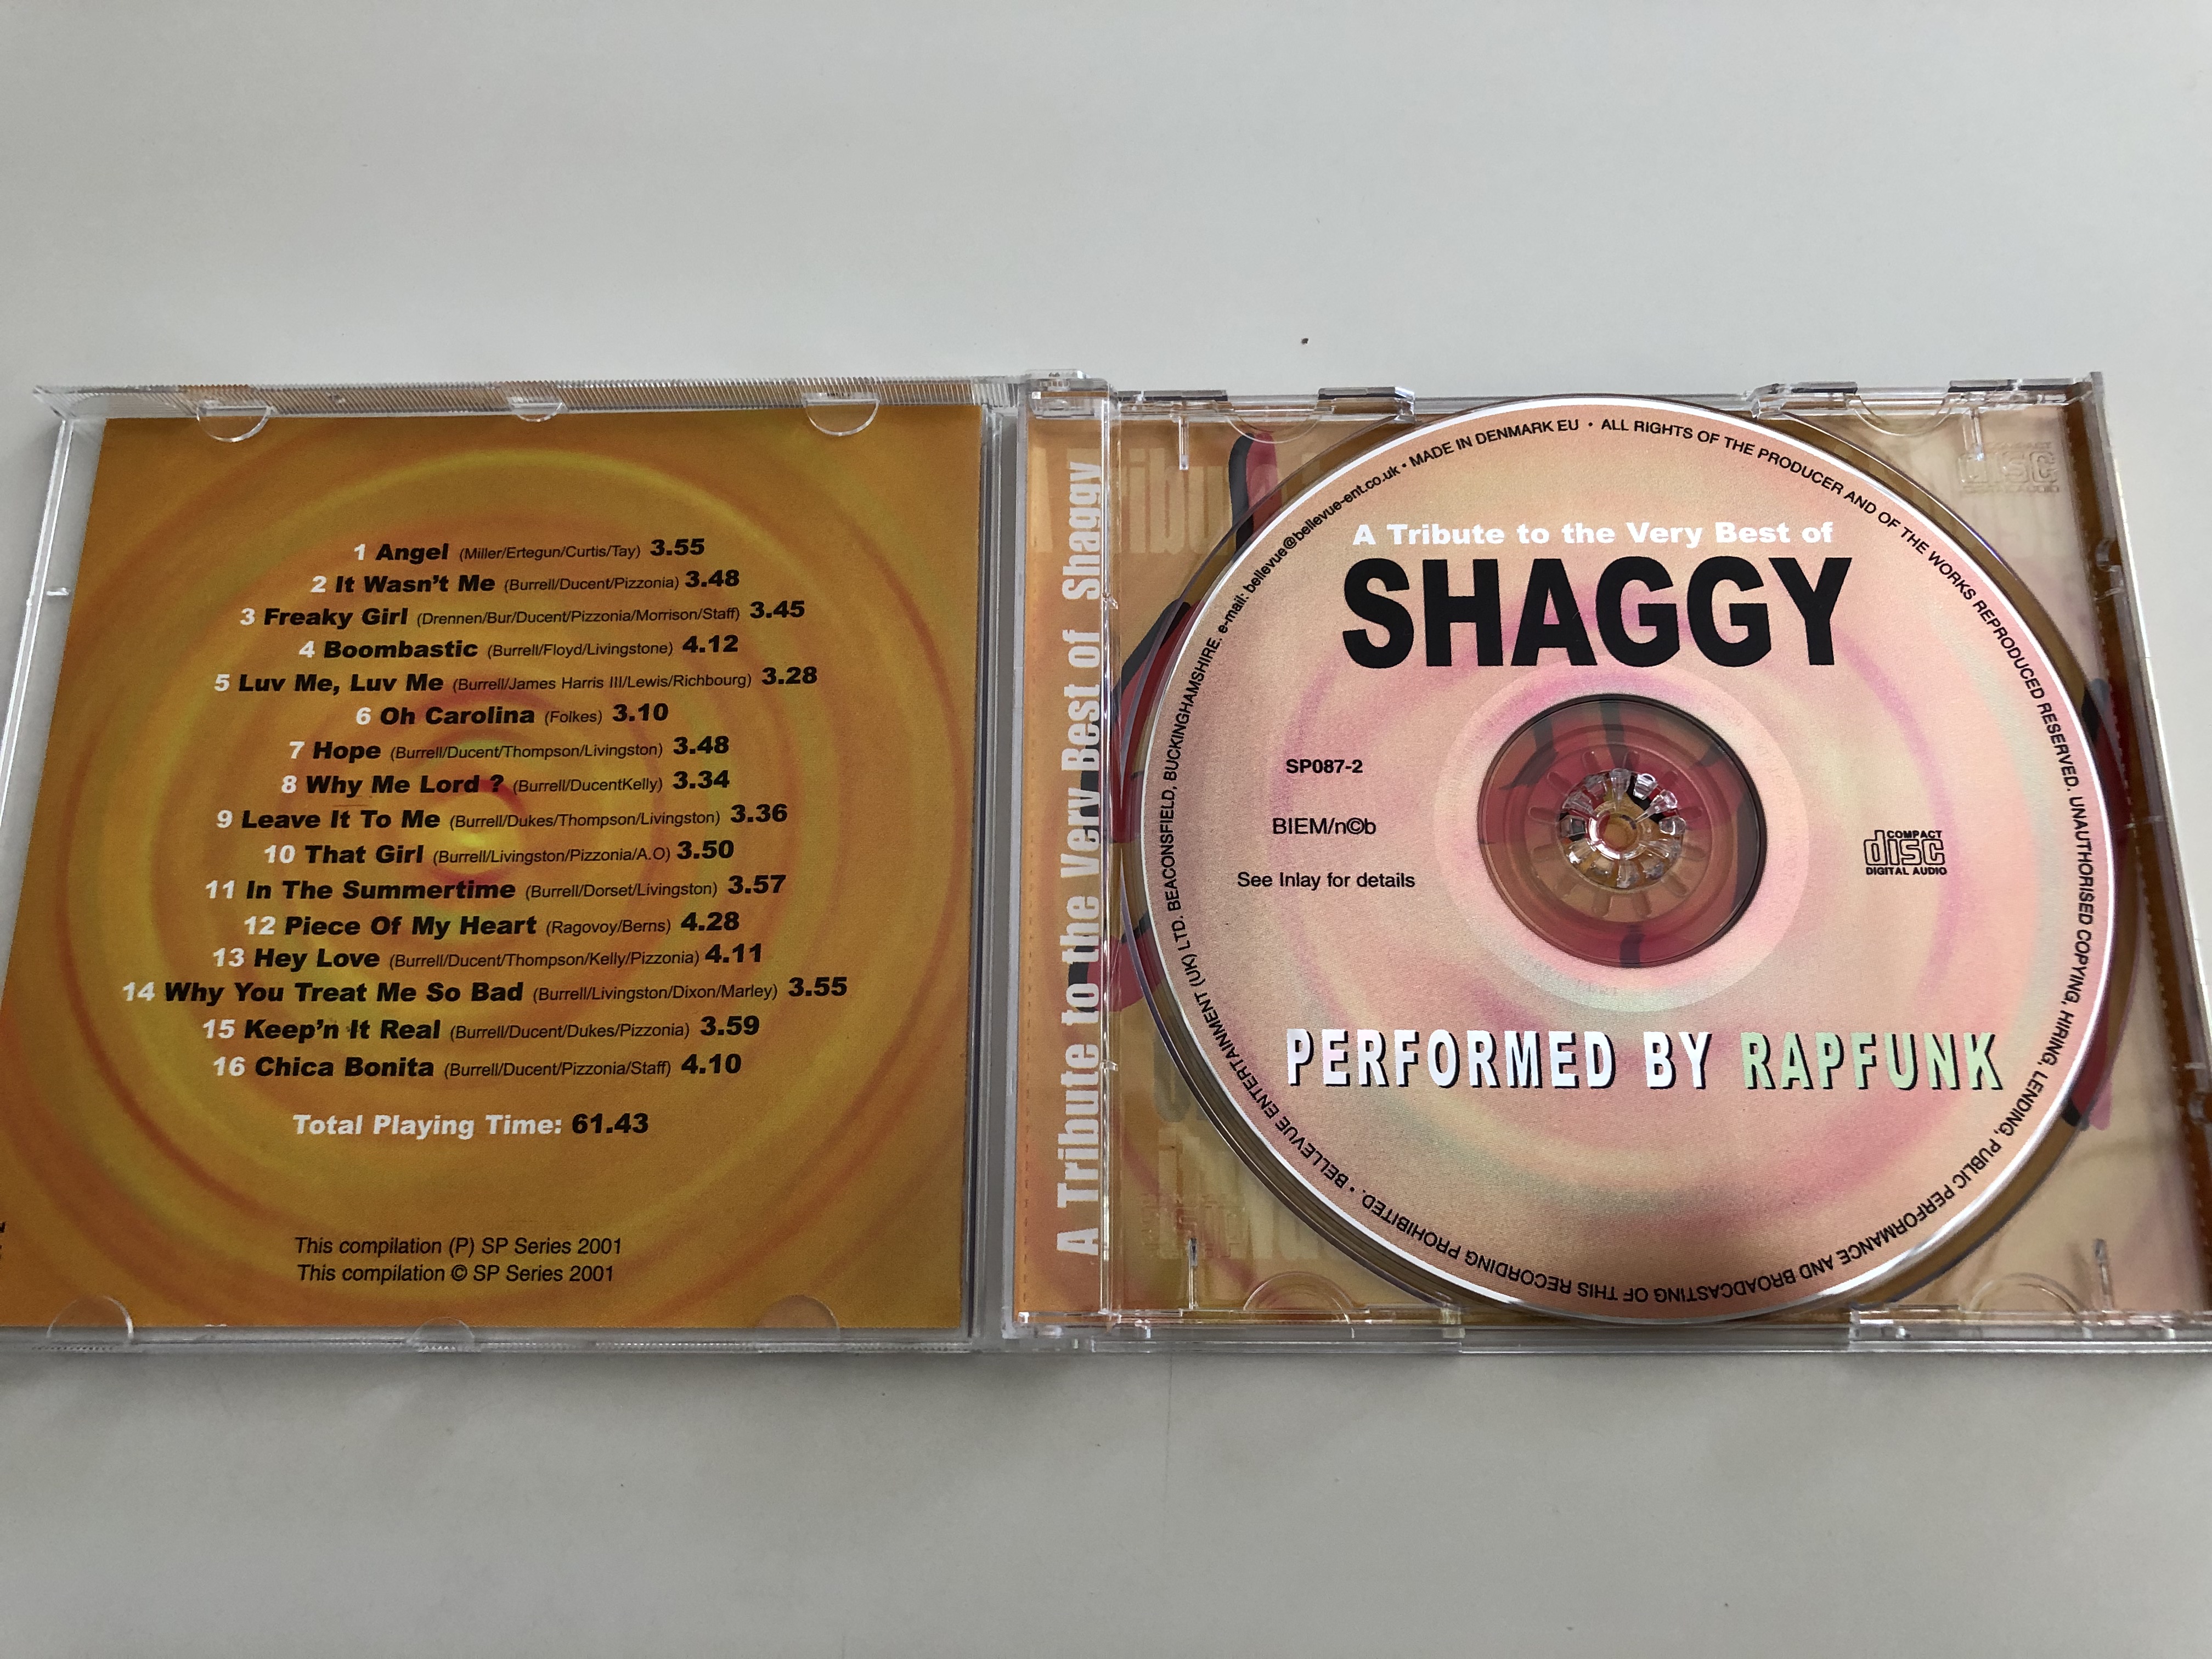 a-tribute-to-the-very-best-of-shaggy-performed-by-rapfunk-featuring-oh-carolina-boombastic-it-wasn-t-me-angel-audio-cd-2001-sp087-2-2-.jpg